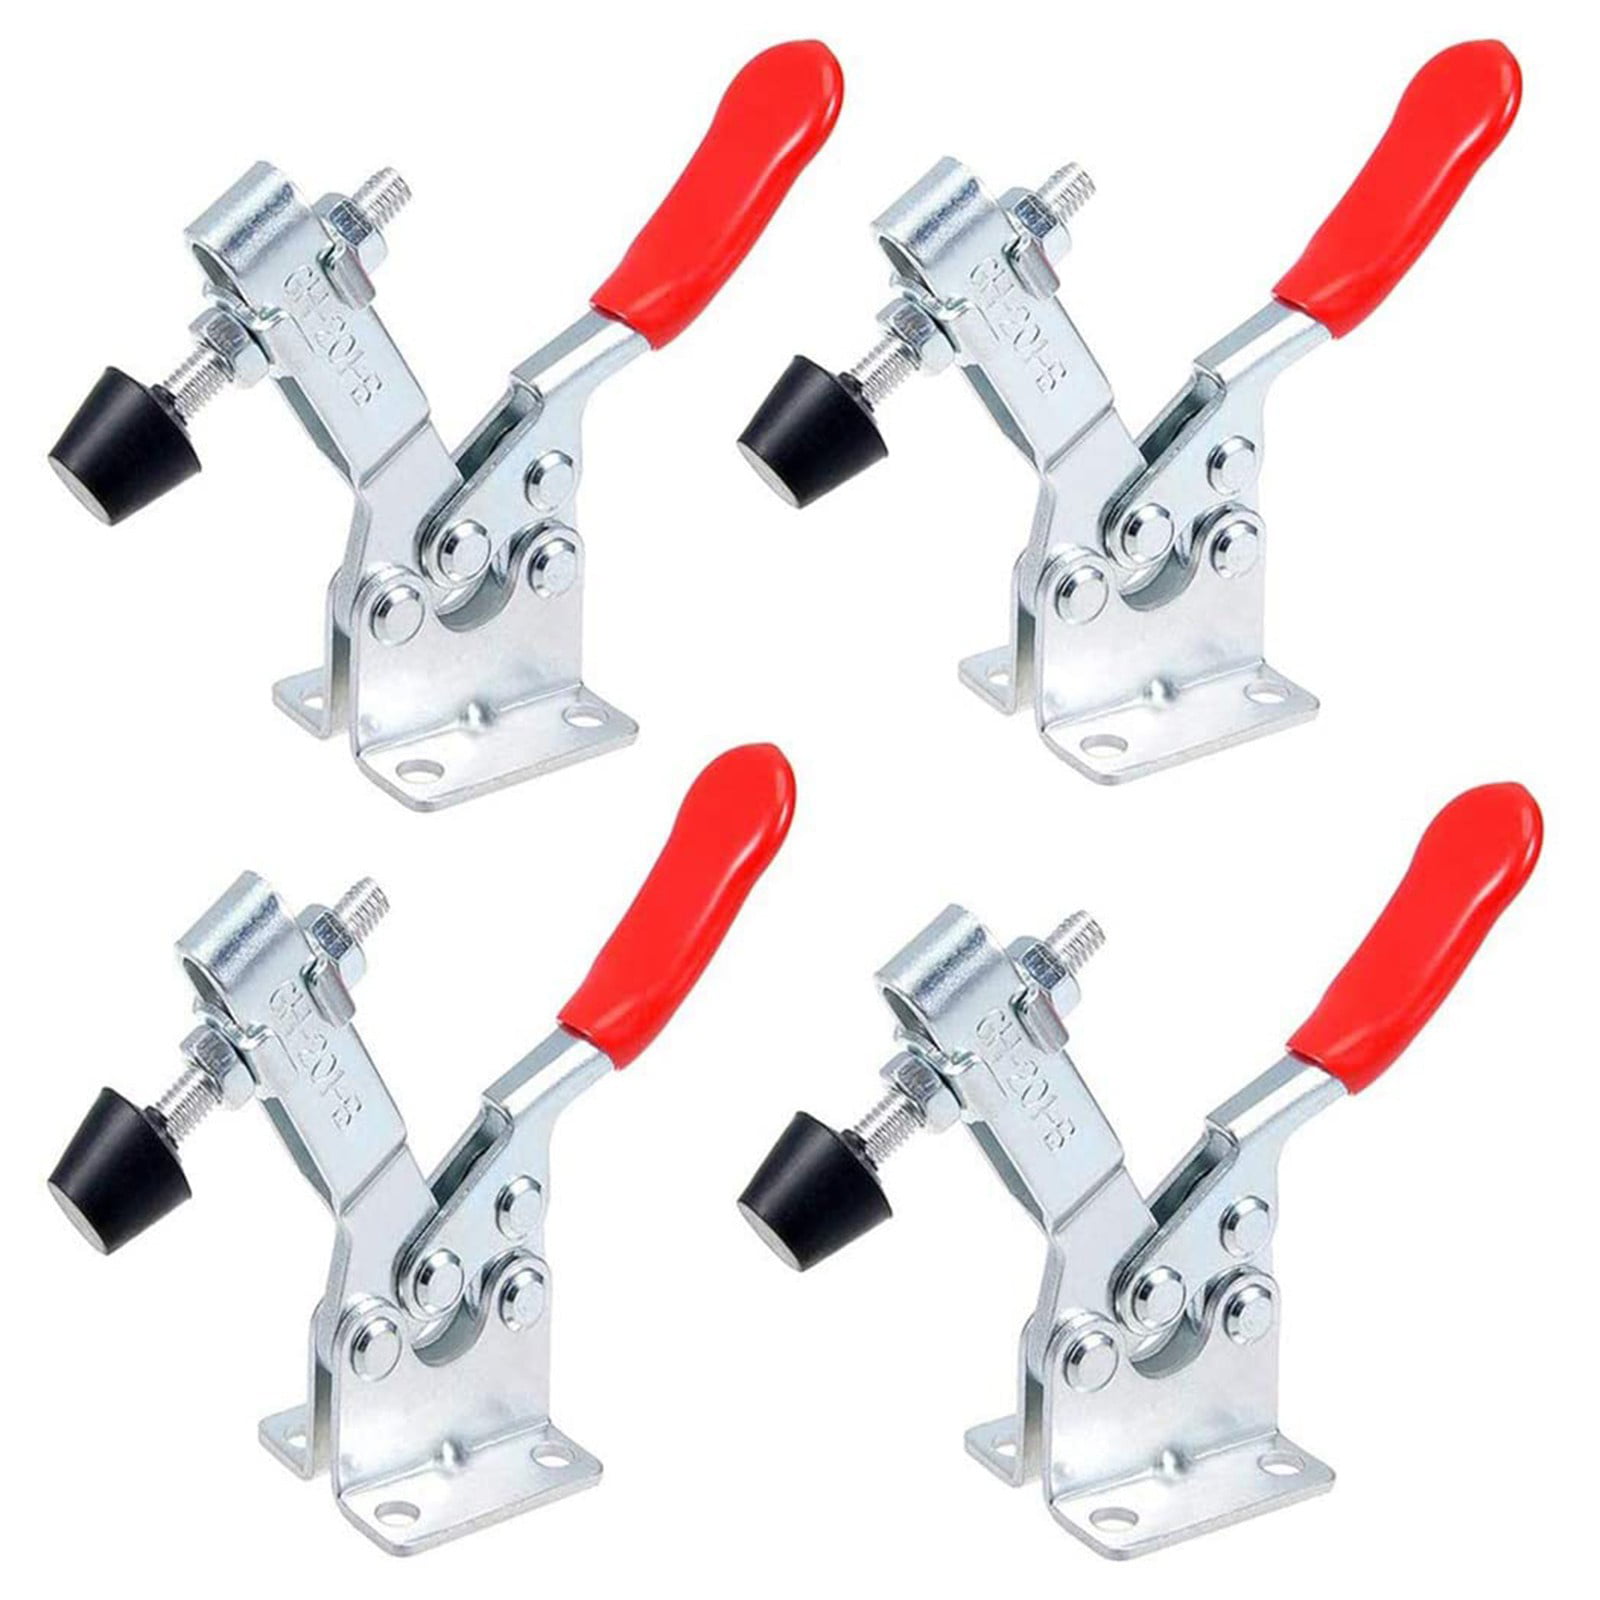 4X Horizontal Handle Toggle Clamps Quick Release Holding Capacity 90Kg/198Lbs 